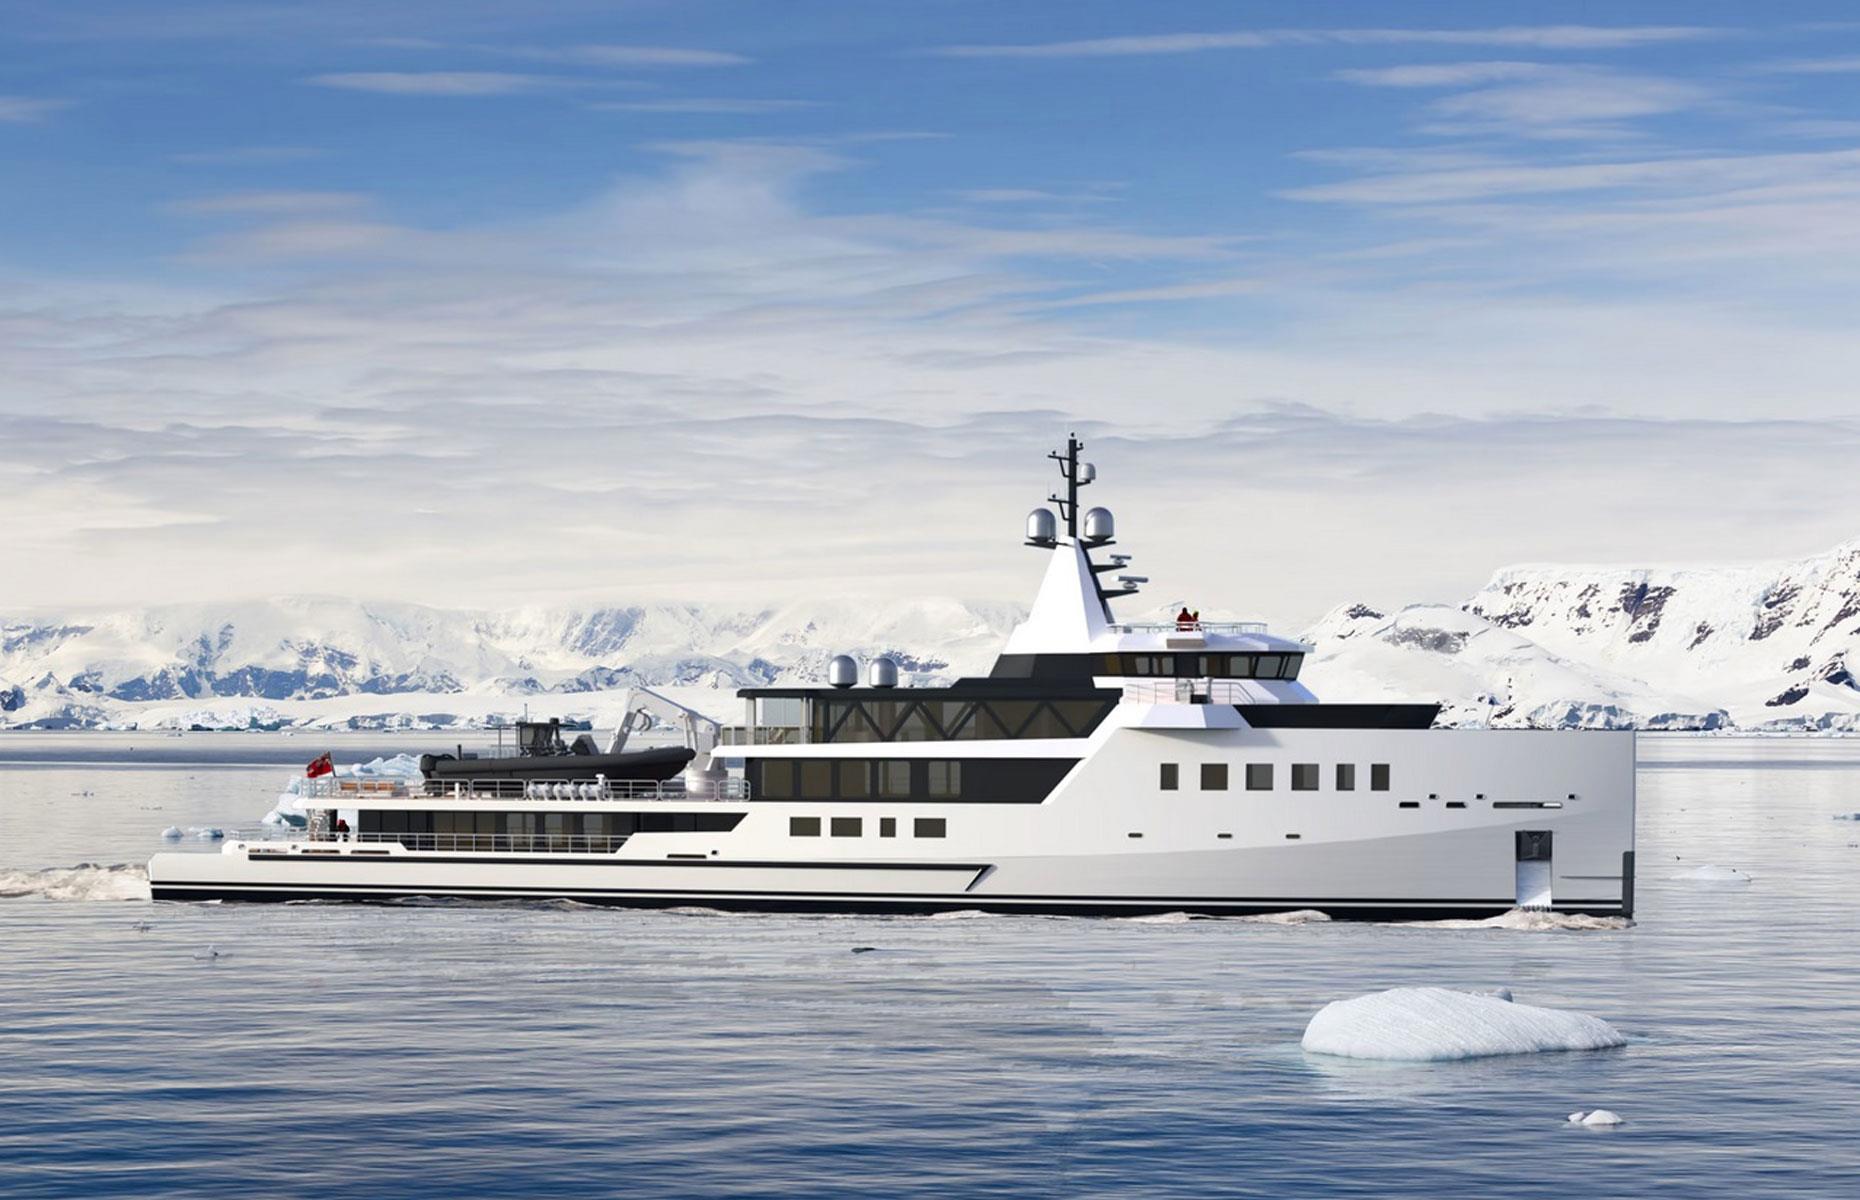 <p>Ushering in a new generation of high-end eco explorers, this expedition vessel from Damen Yachting in the Netherlands boasts a hybrid propulsion system for zero-emission cruising. For the uninitiated, a hybrid propulsion system uses two or more forms of propulsion, such as a biofuel or diesel engine combined with an electric machine.</p>  <p>As buyers become increasingly aware of environmental concerns, naval architects and yachtbuilders are devising green-leaning vessels that don't compromise on style, luxury, or performance. Damen is among the firms leading the way.</p>